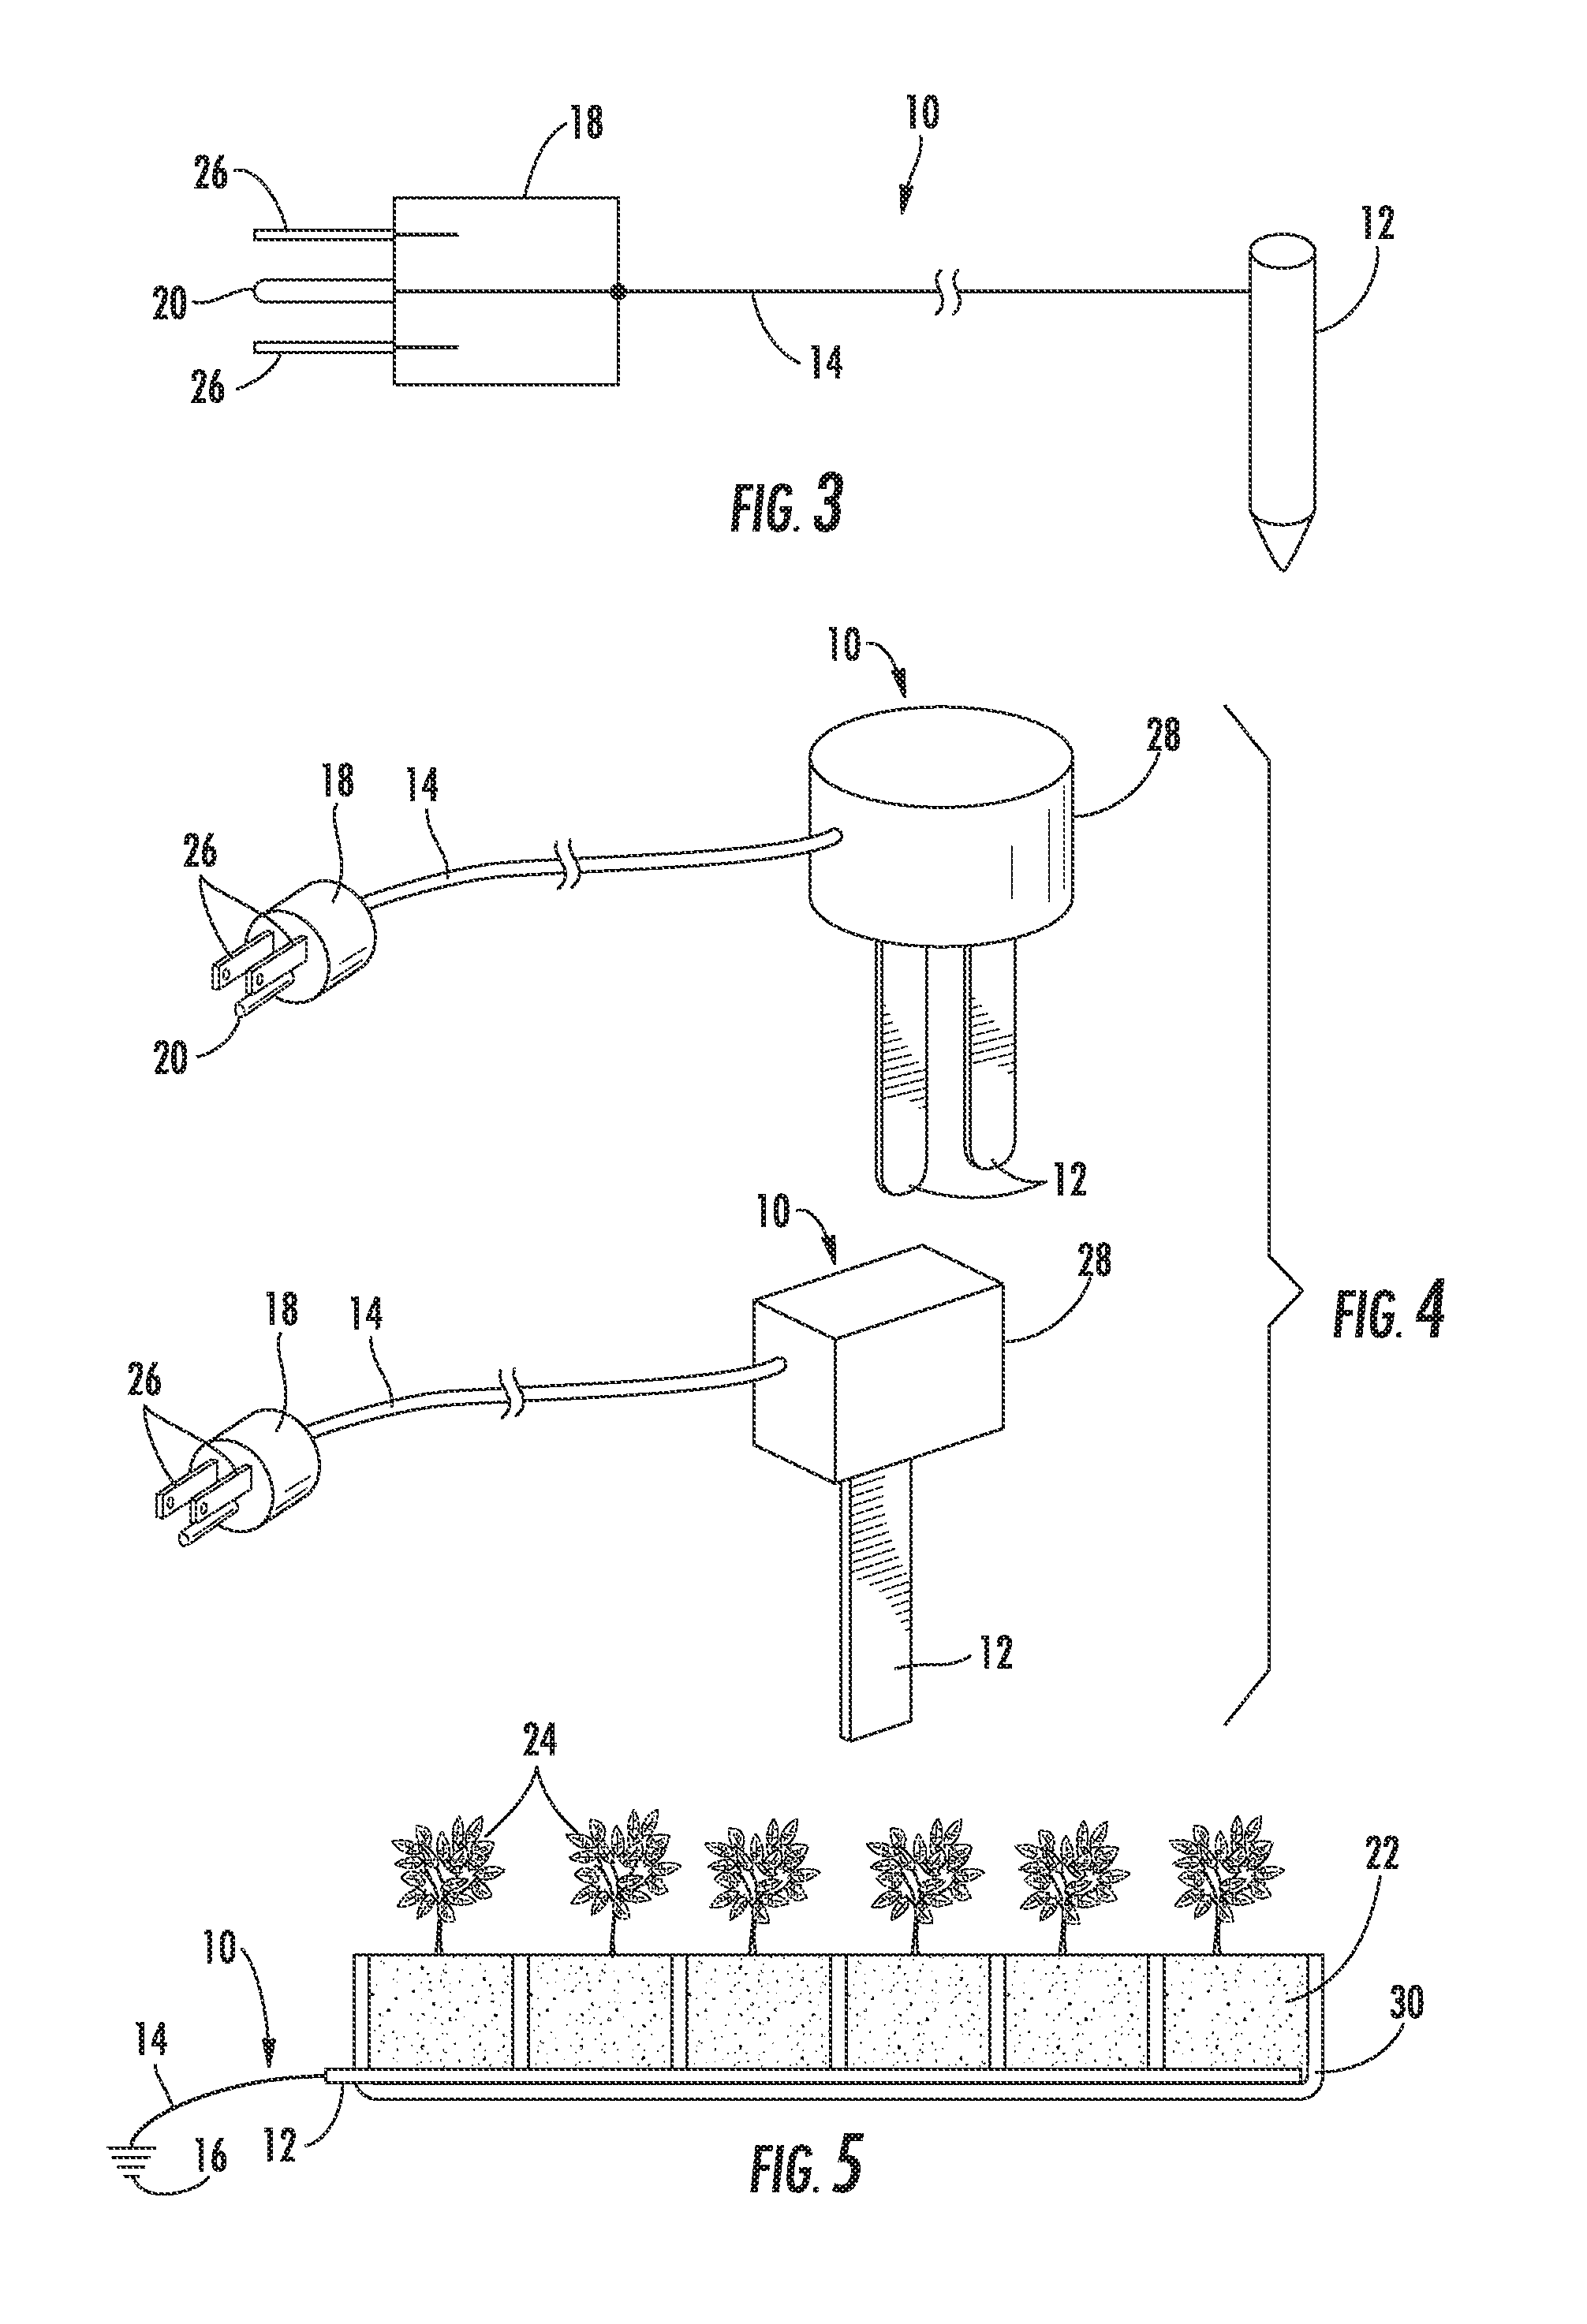 Method and system for organic cultivating and environmental control of container grown plants